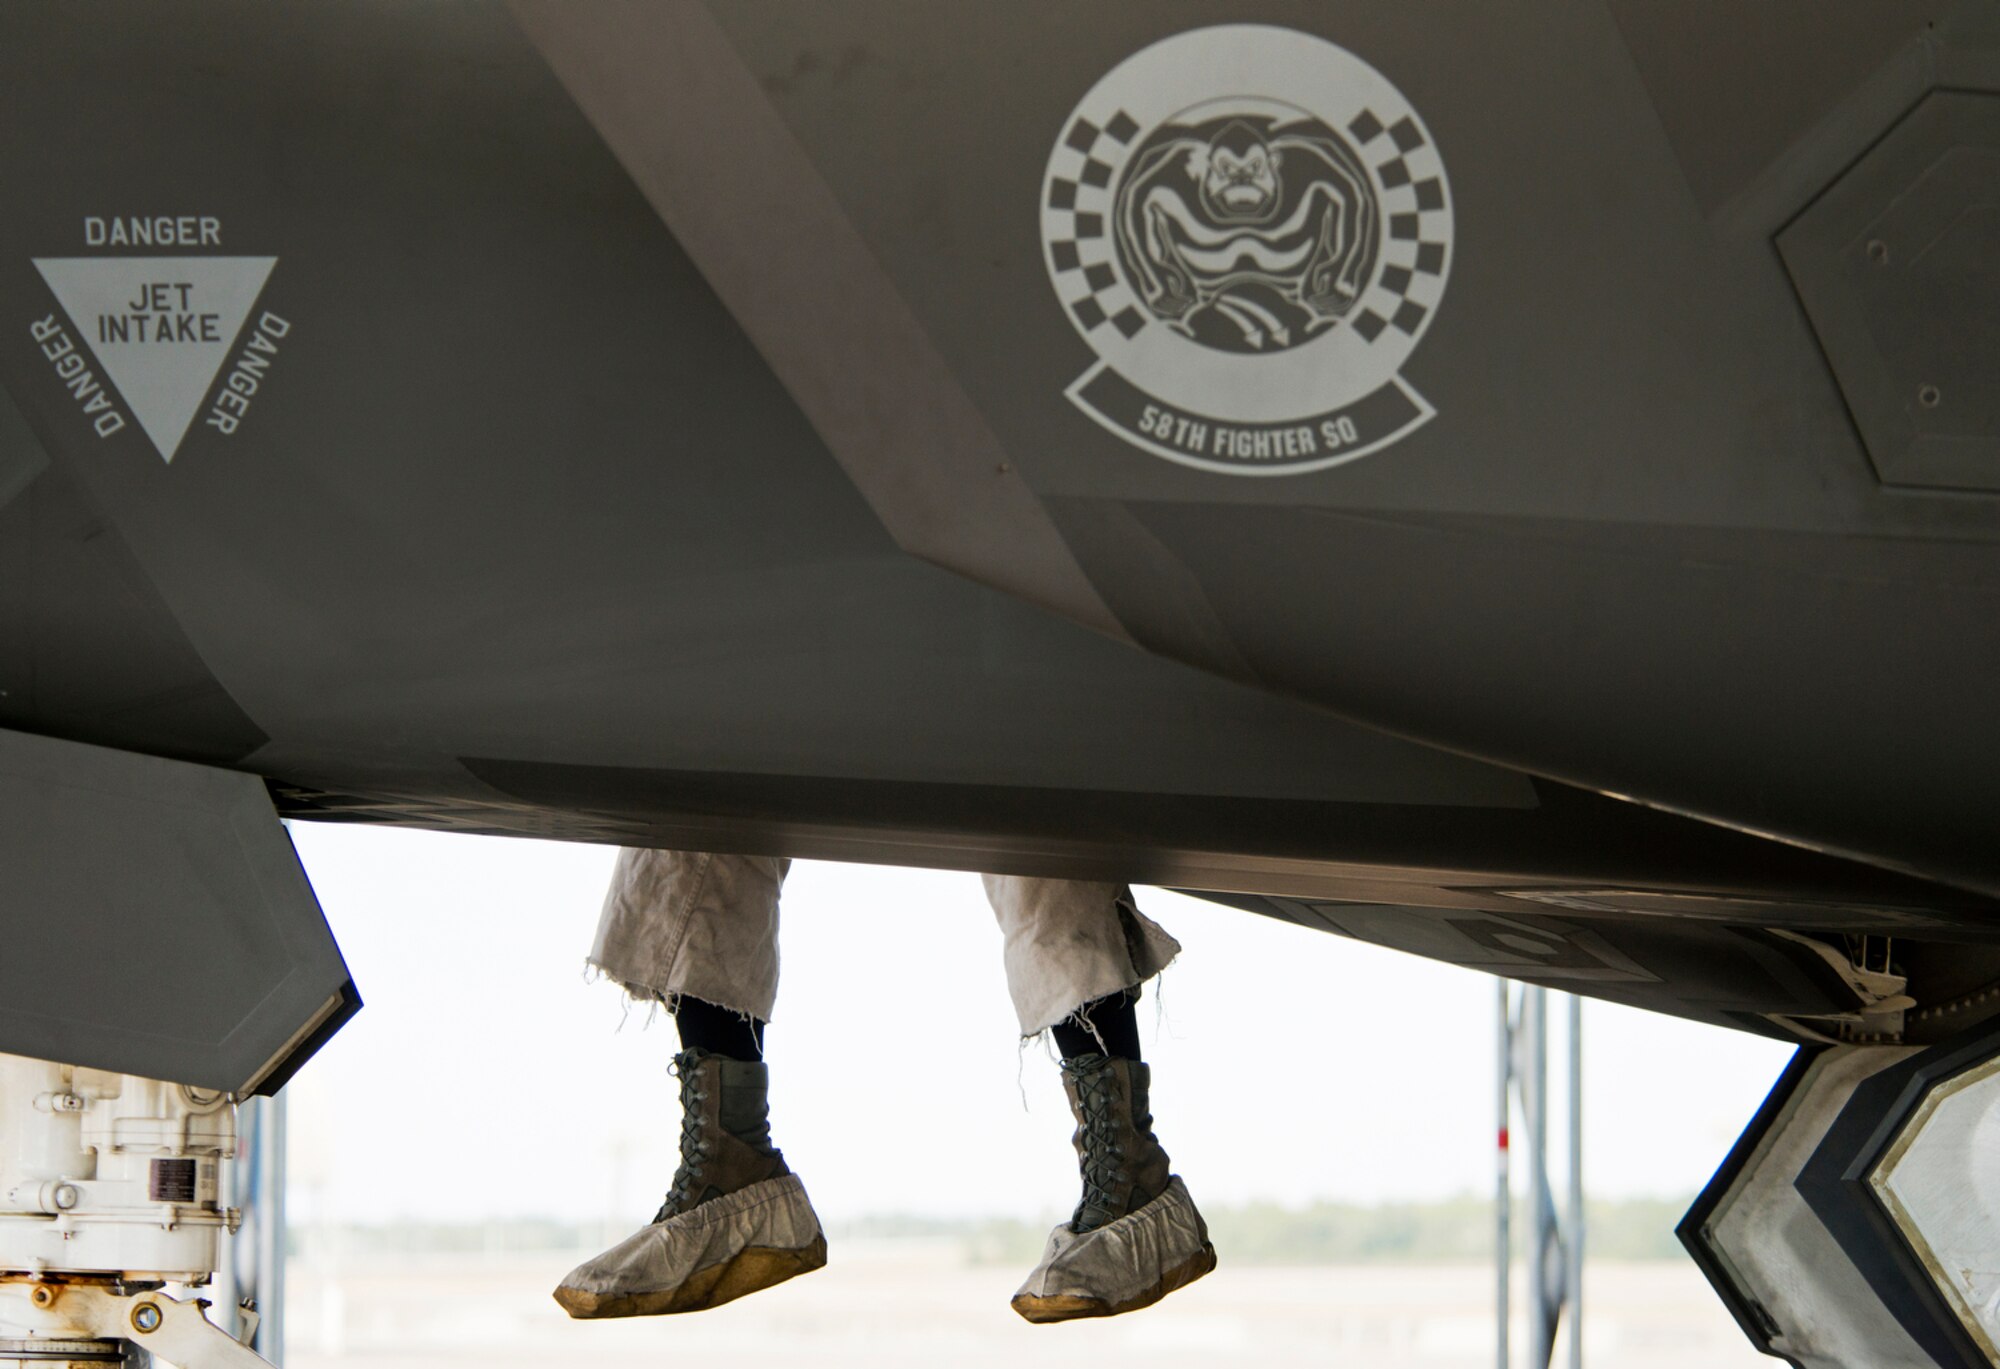 A 58th Fighter Squadron maintainer climbs out of the intake of an F-35A Lightning II after performing post-flight checks on the aircraft. The 58th FS is part of the 33rd Fighter Wing, a joint graduate flying and maintenance training wing for the F-35. (U.S. Air Force photo/Tech. Sgt. Bennie J. Davis III)